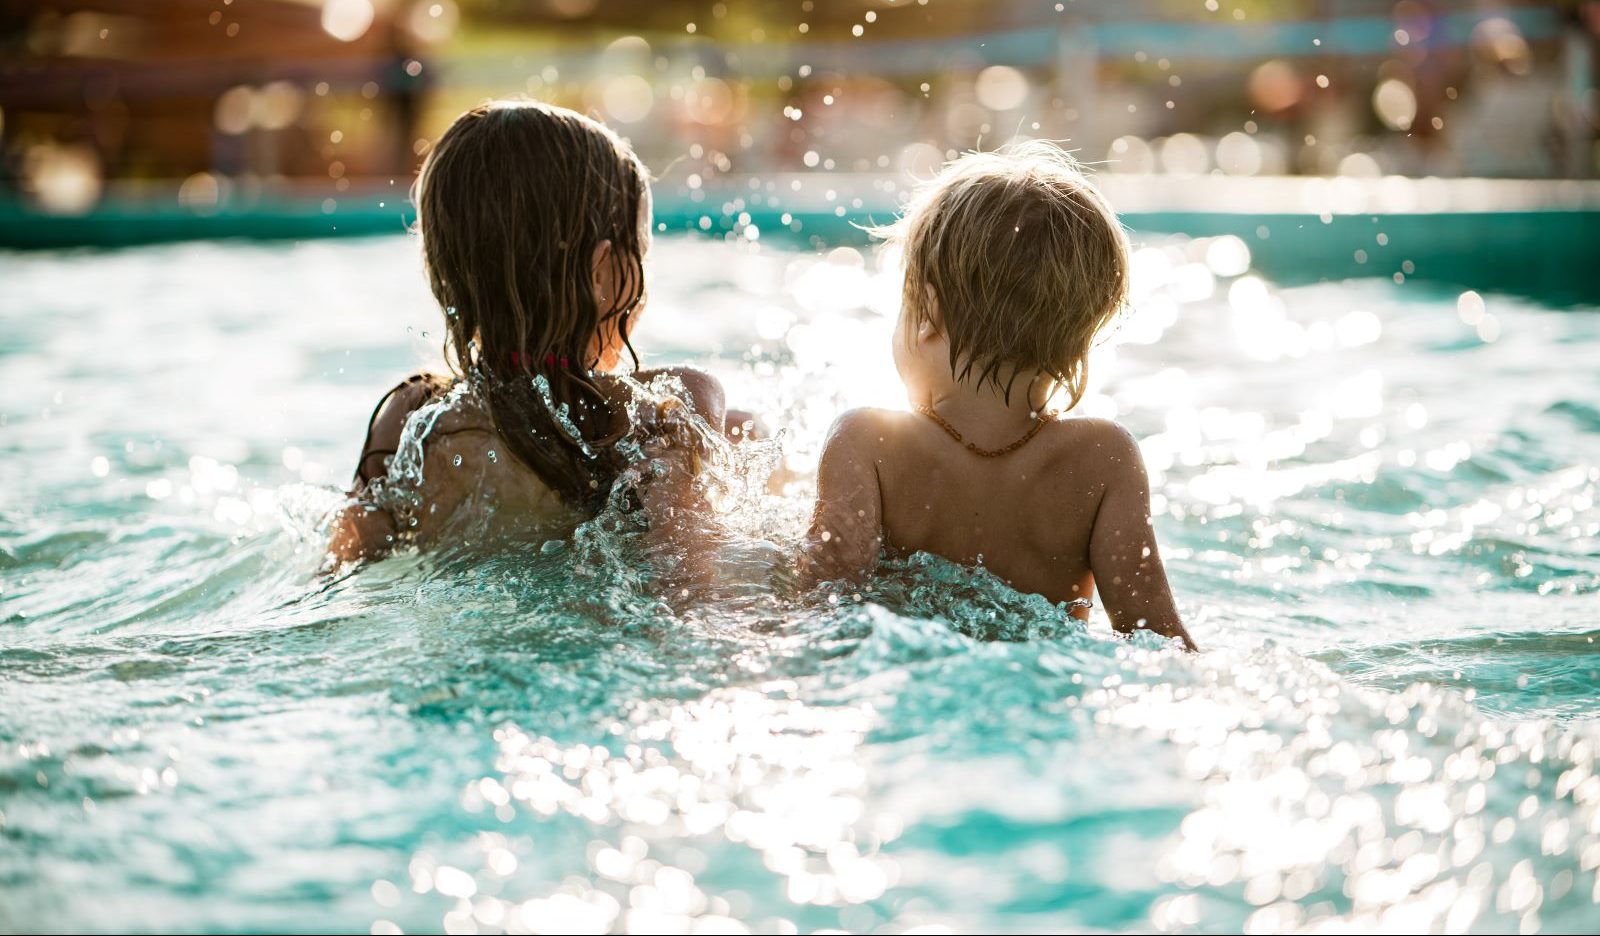 Before you grab your sunscreen and head to the nearest pool this summer, it's important to think about water safety.